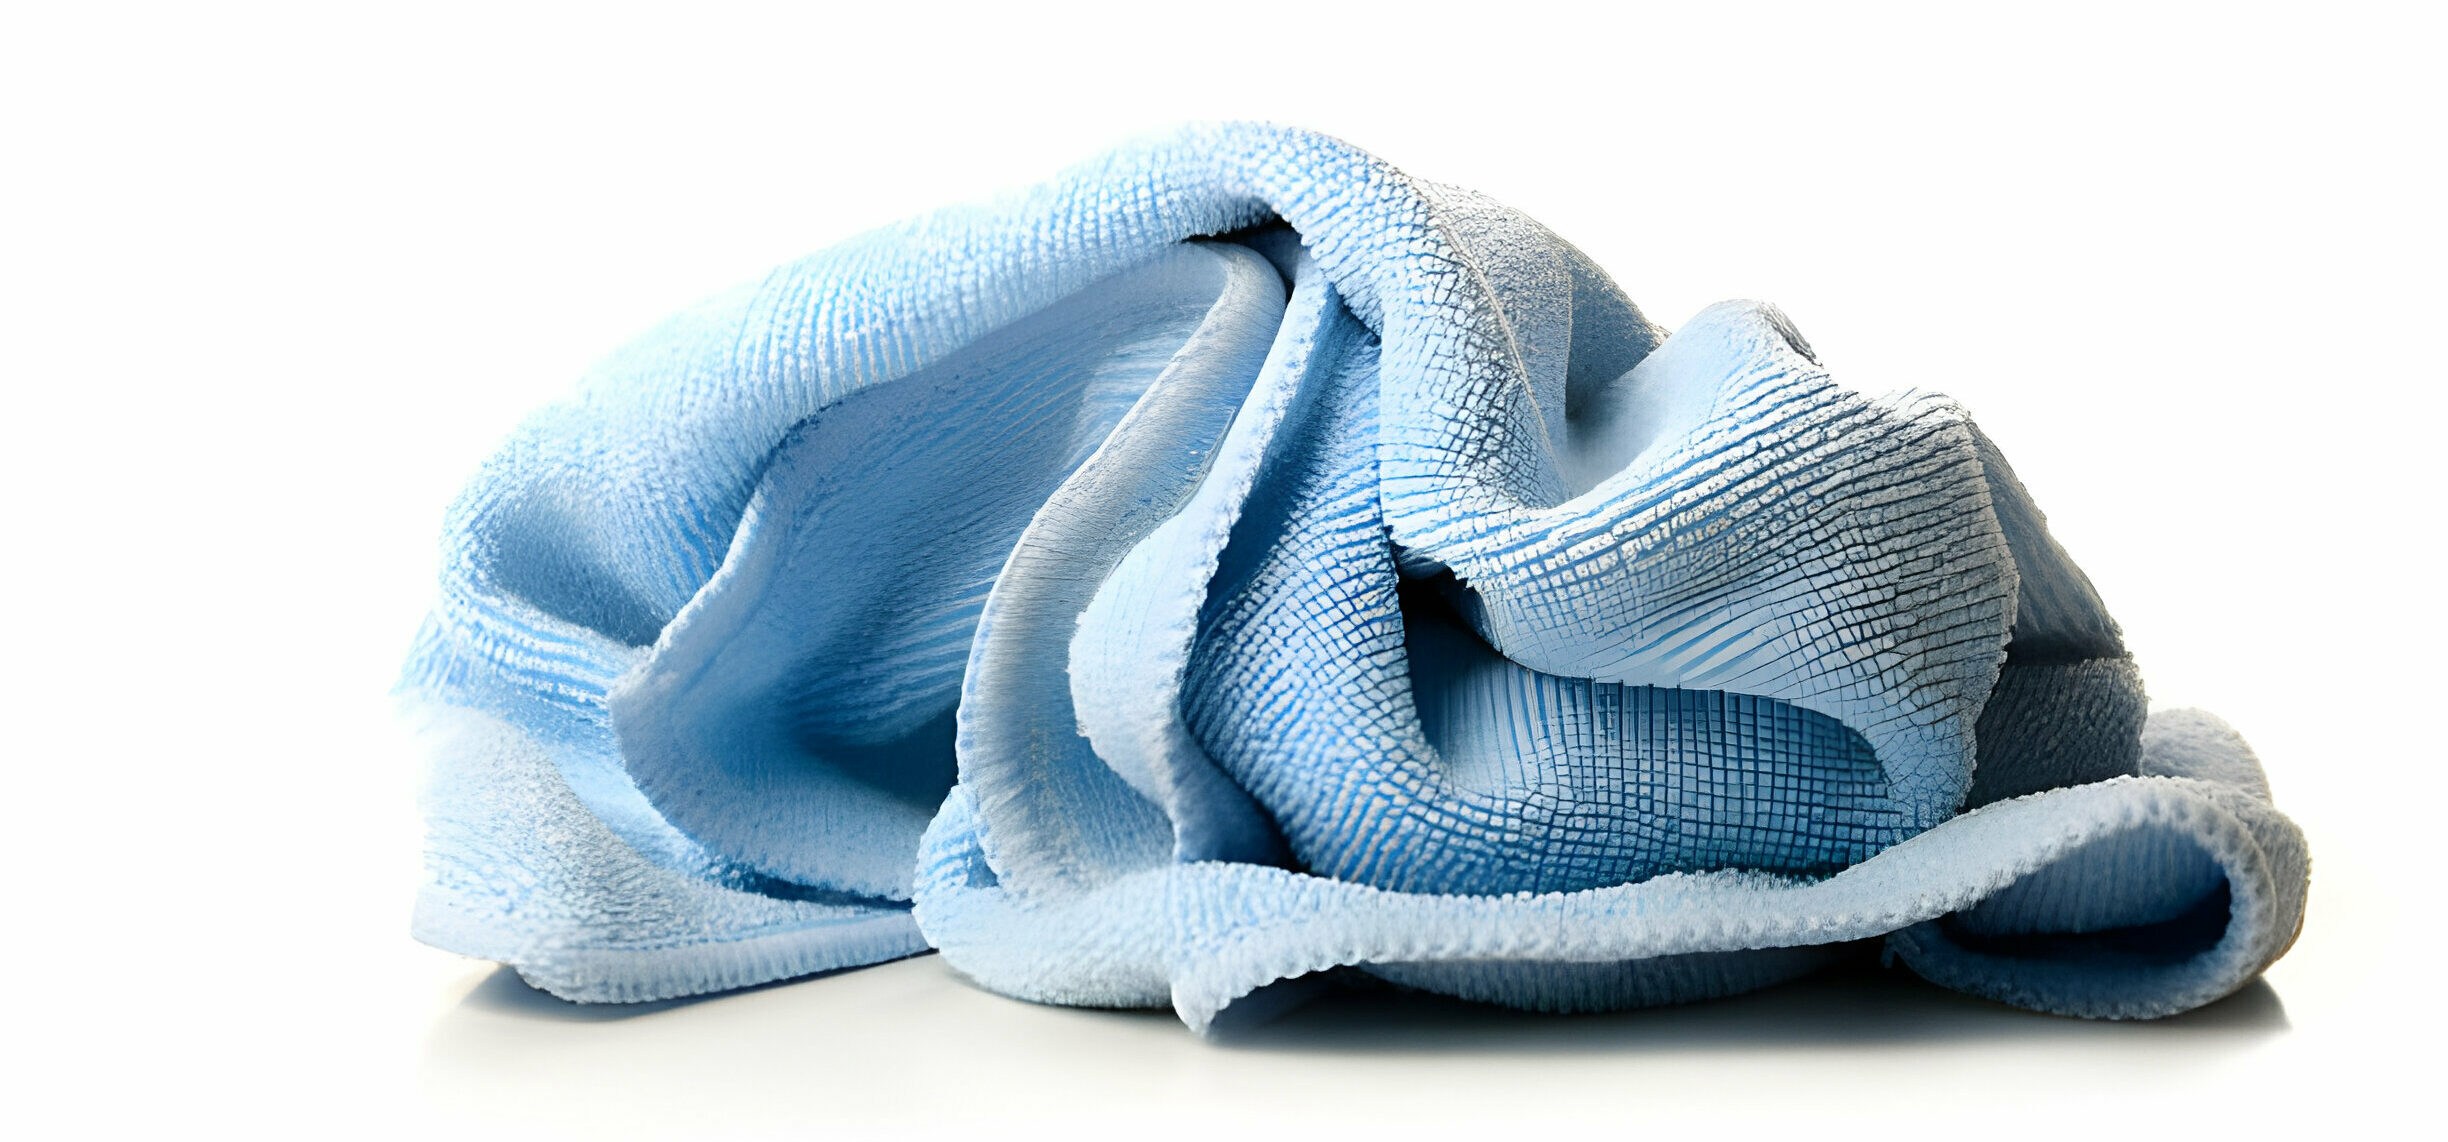 How to Clean Microfiber Cloths Tidyhere Image of a Blue Microfiber Rag